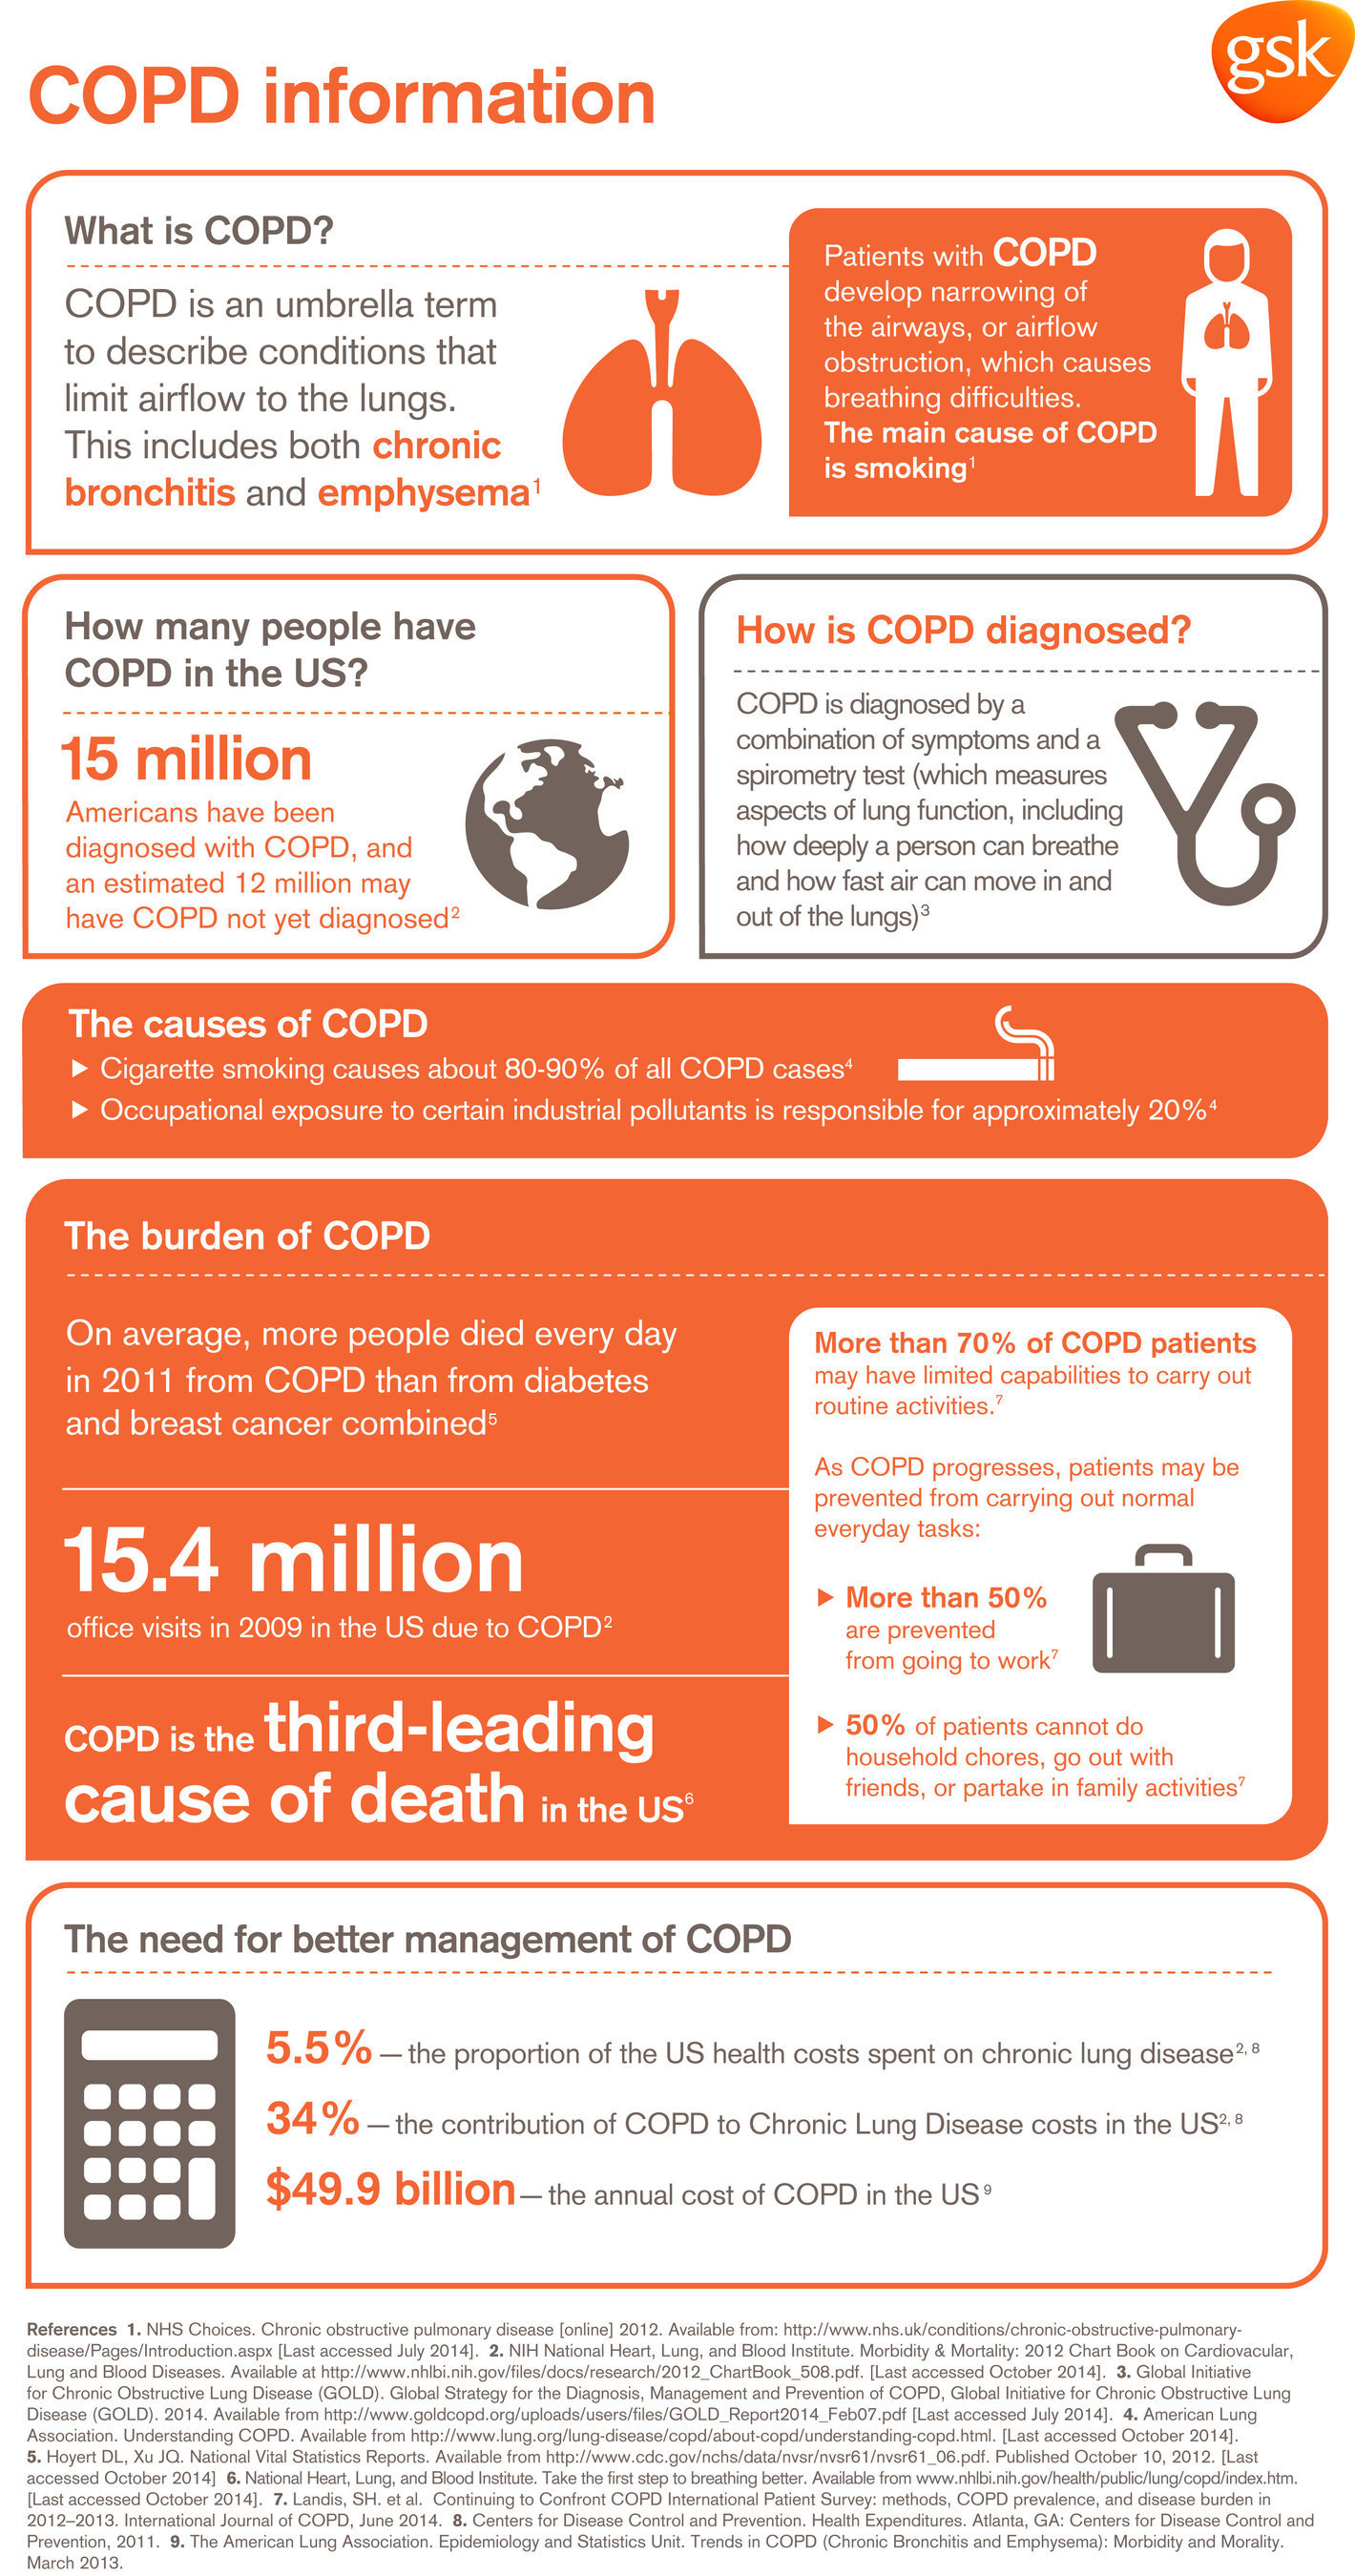 GSK Brings Attention to COPD in Observation of National COPD Awareness Month and World COPD Day